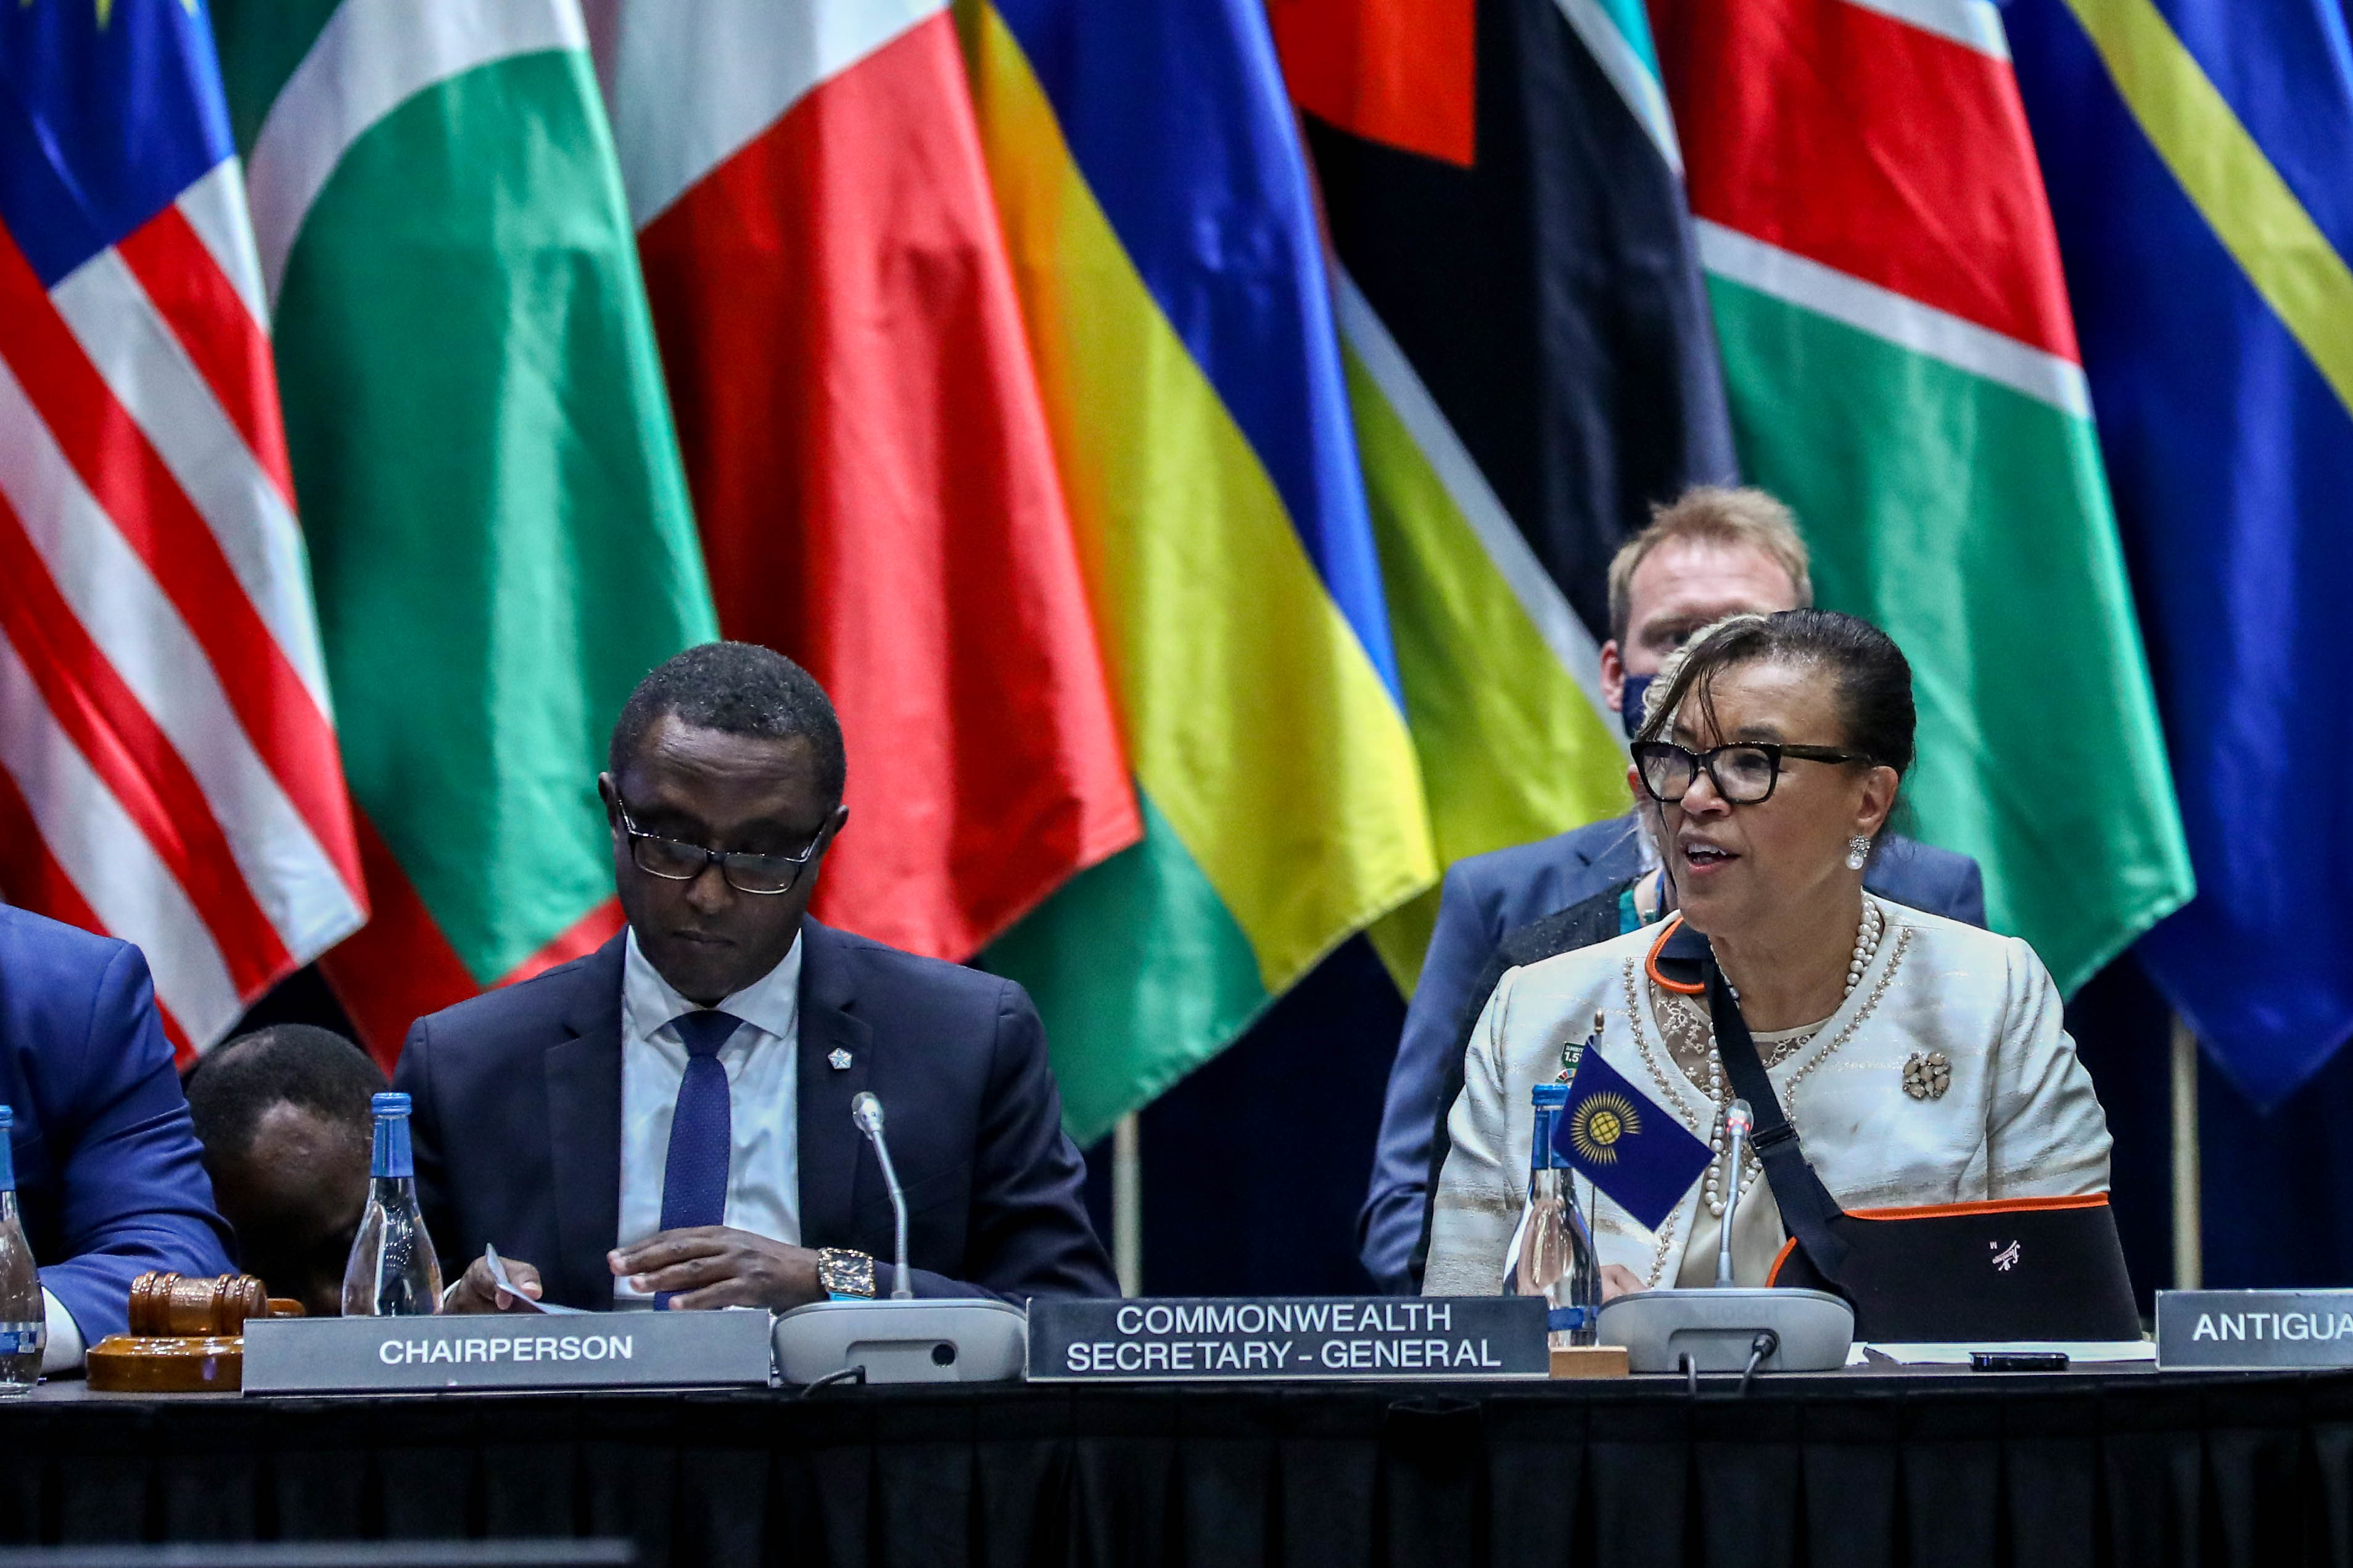 The meeting of ministers was chaired by Rwandau2019s Foreign affairs Minister, Vincent Biruta, flanked by Commonwealth Secretary-General, Patricia Scotland QC in Kigali on June 22. 